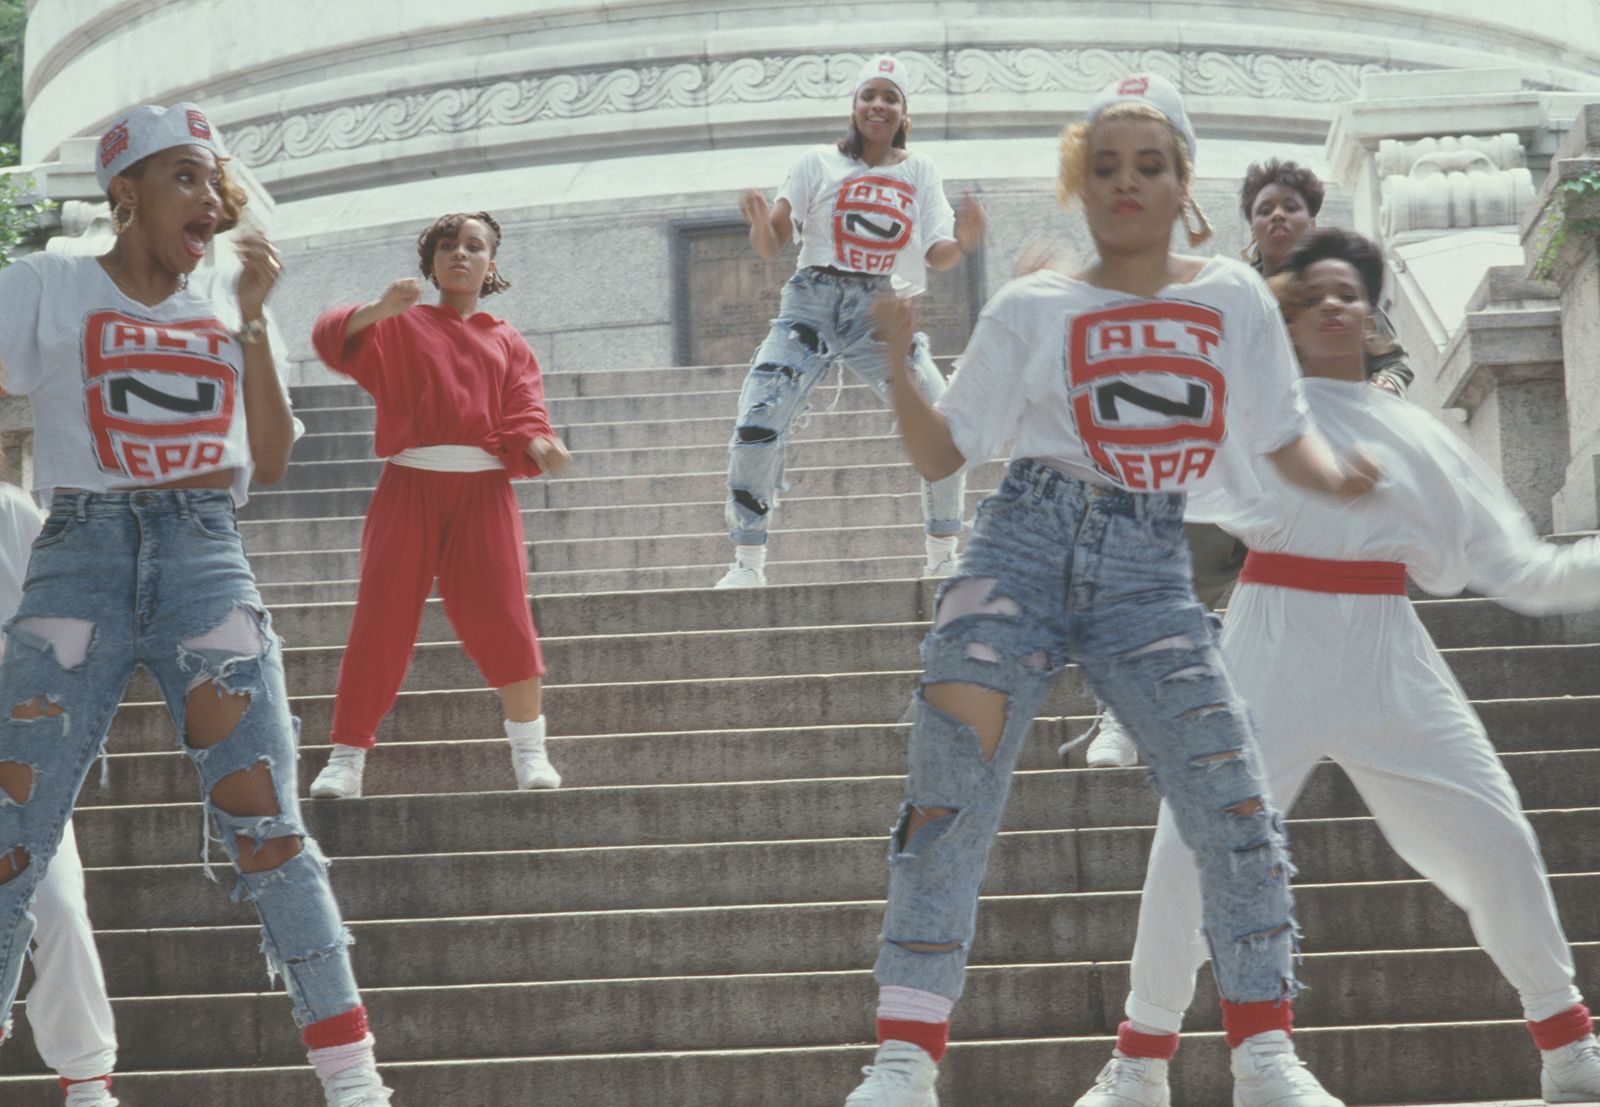 Fashion trends in the 1980s 